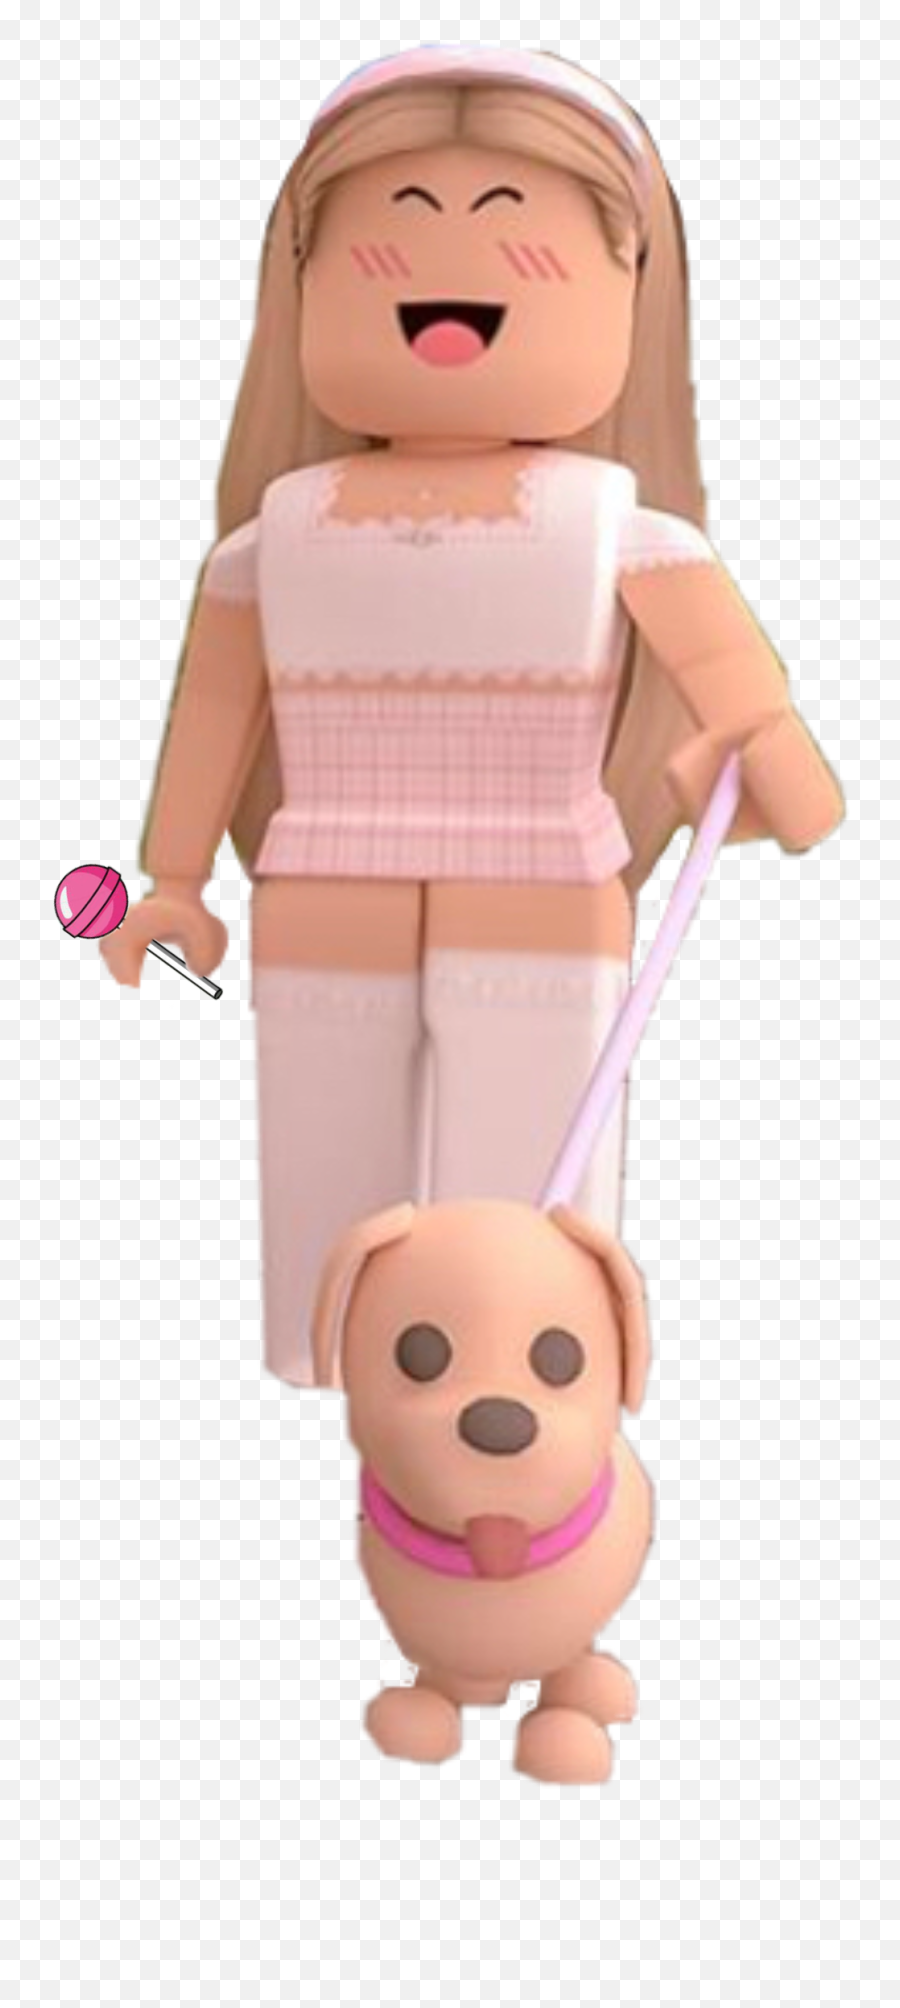 The Most Edited - Aesthetic Roblox Names For Adopt Me Emoji,Emoticon Long Blonde Haired Girl With Beagle Dog